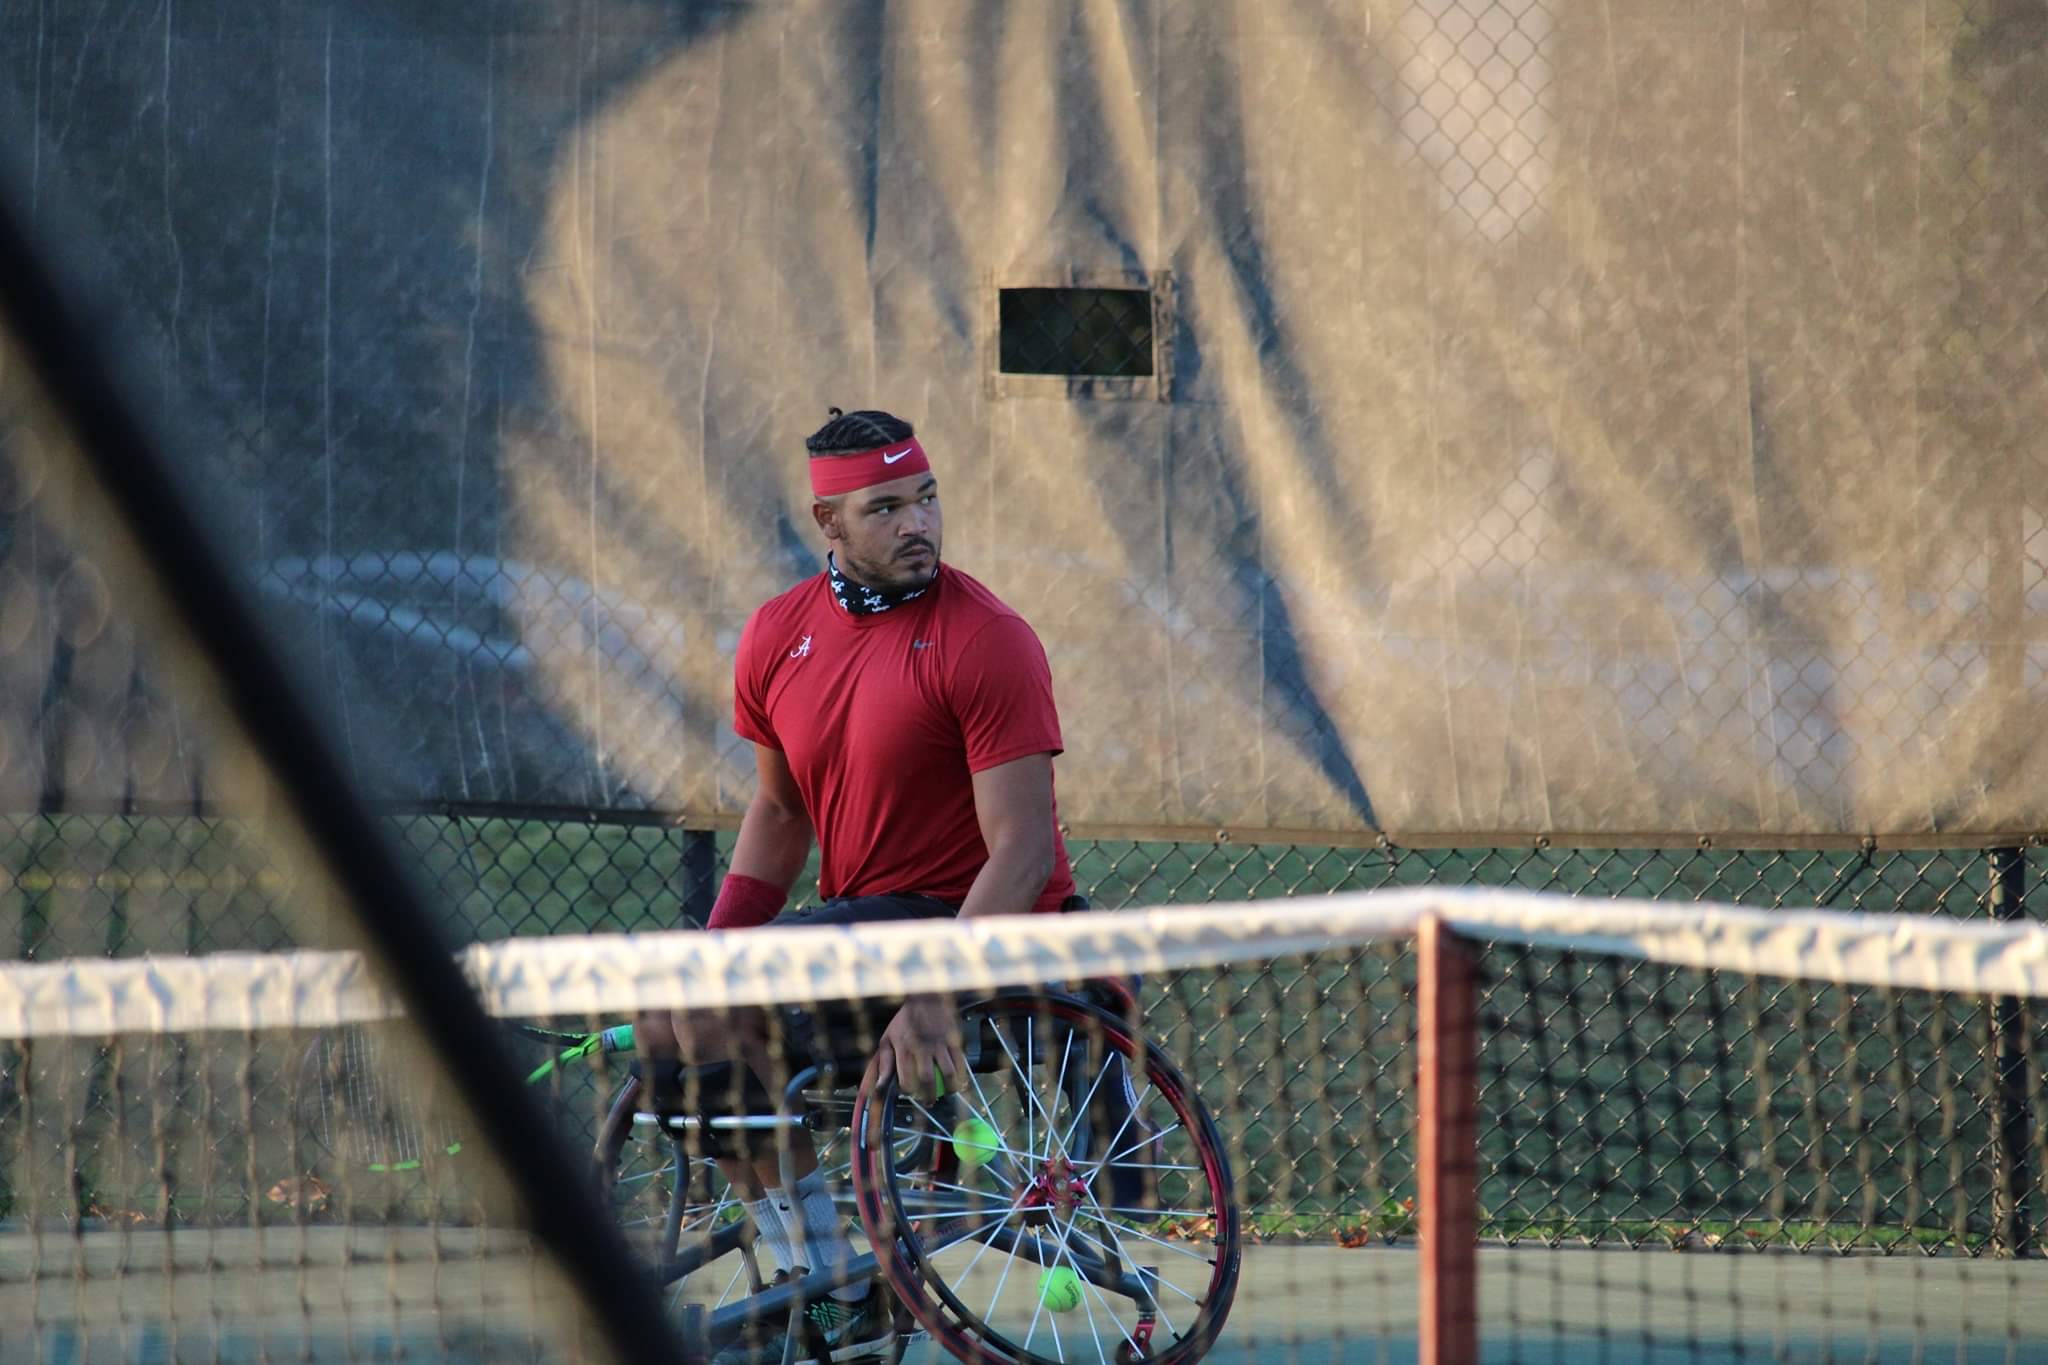 Jeremy Boyd playing wheelchair tennis on a court